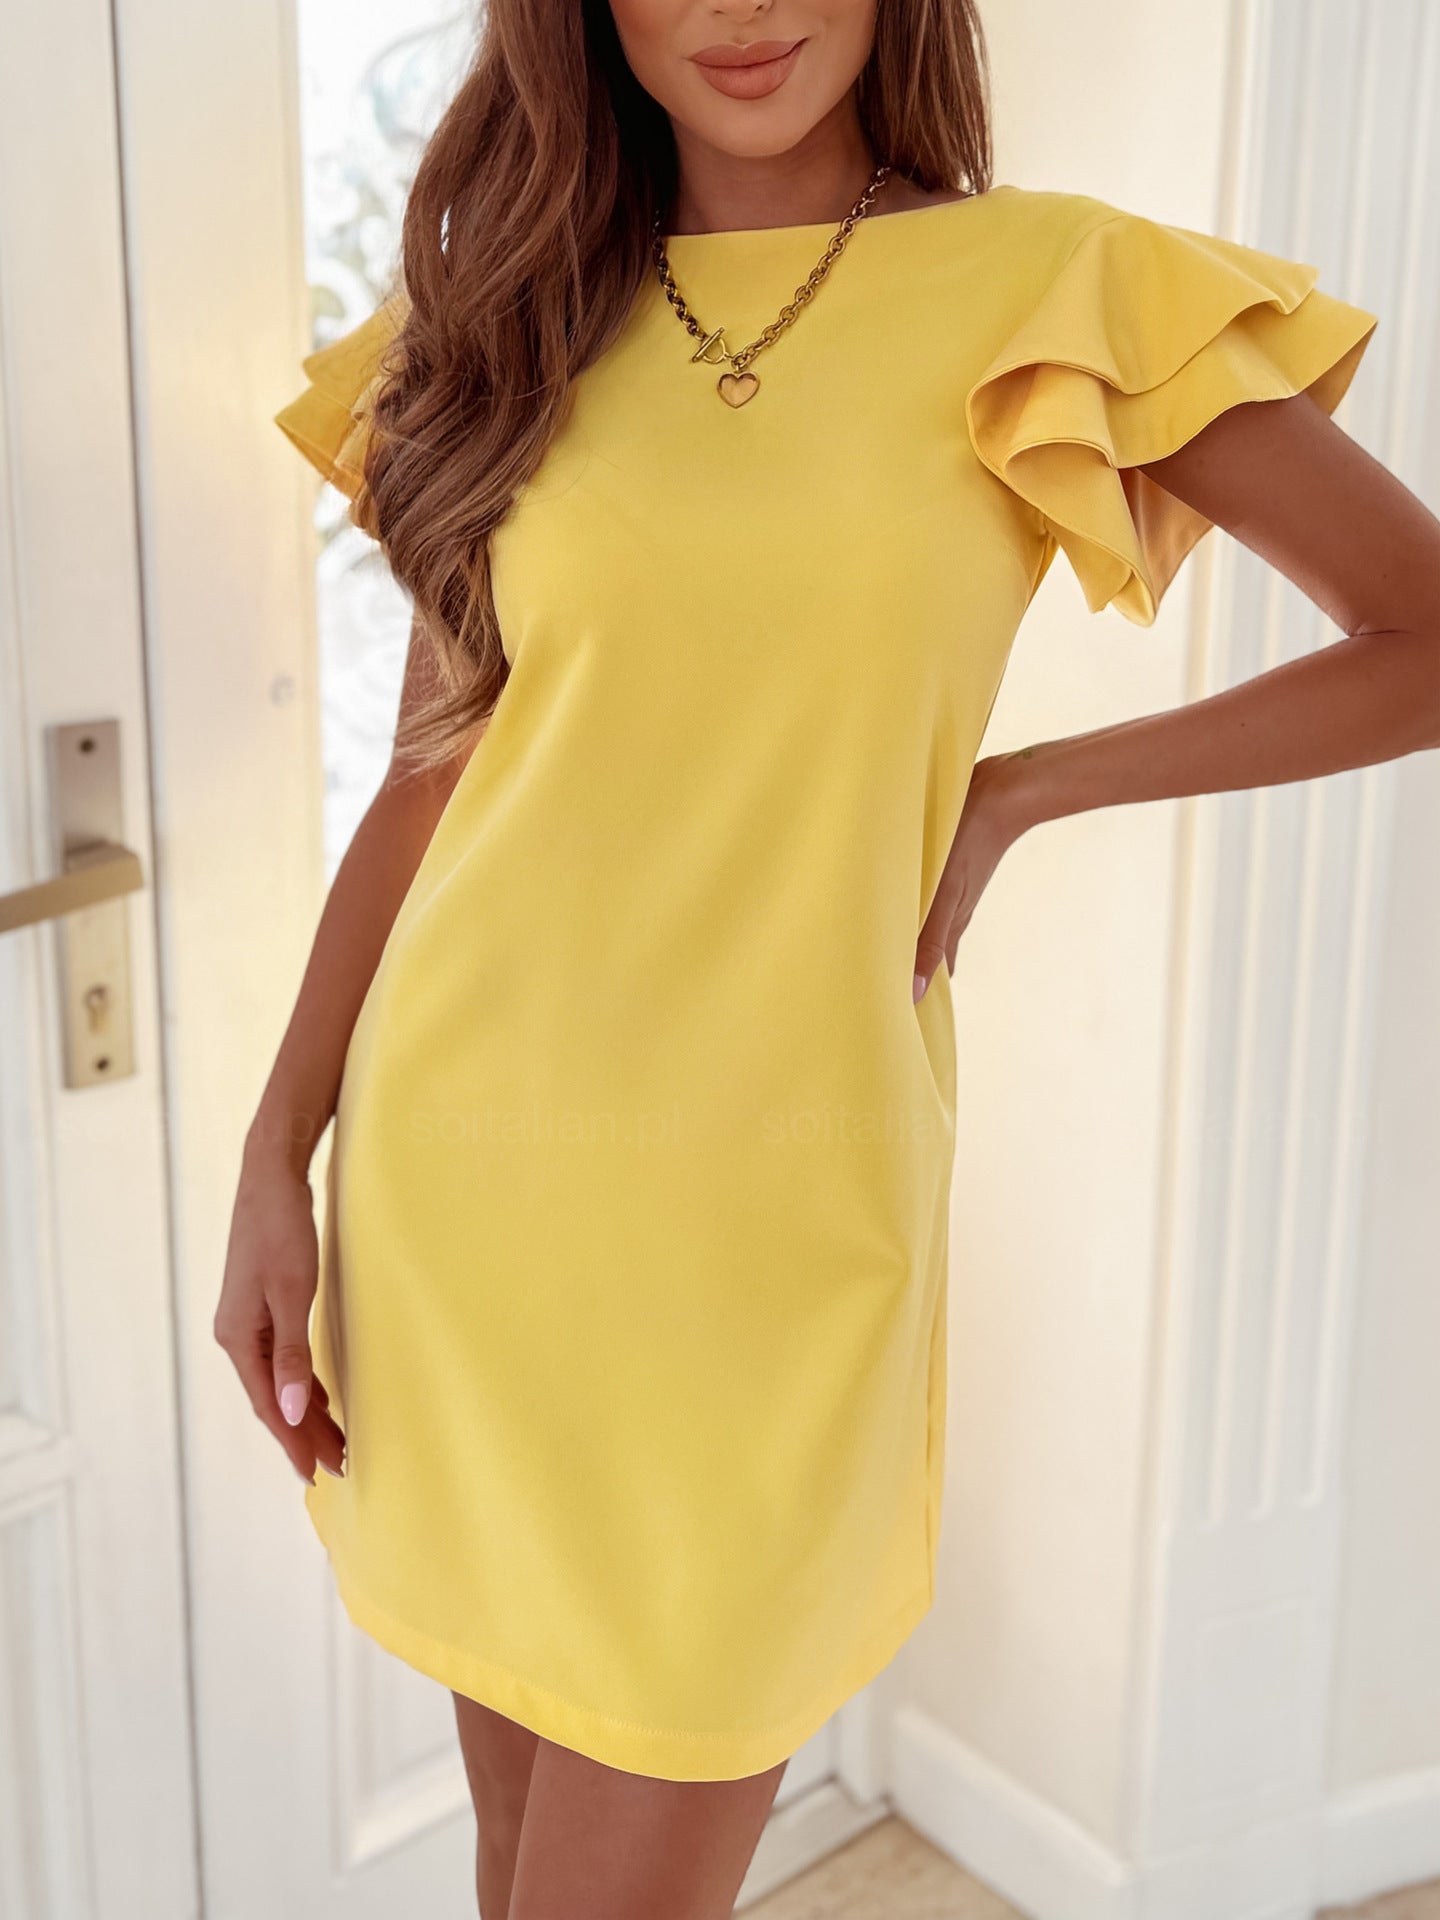 Women's Summer Short Sleeve Backless Dress with a Touch of Simplicity